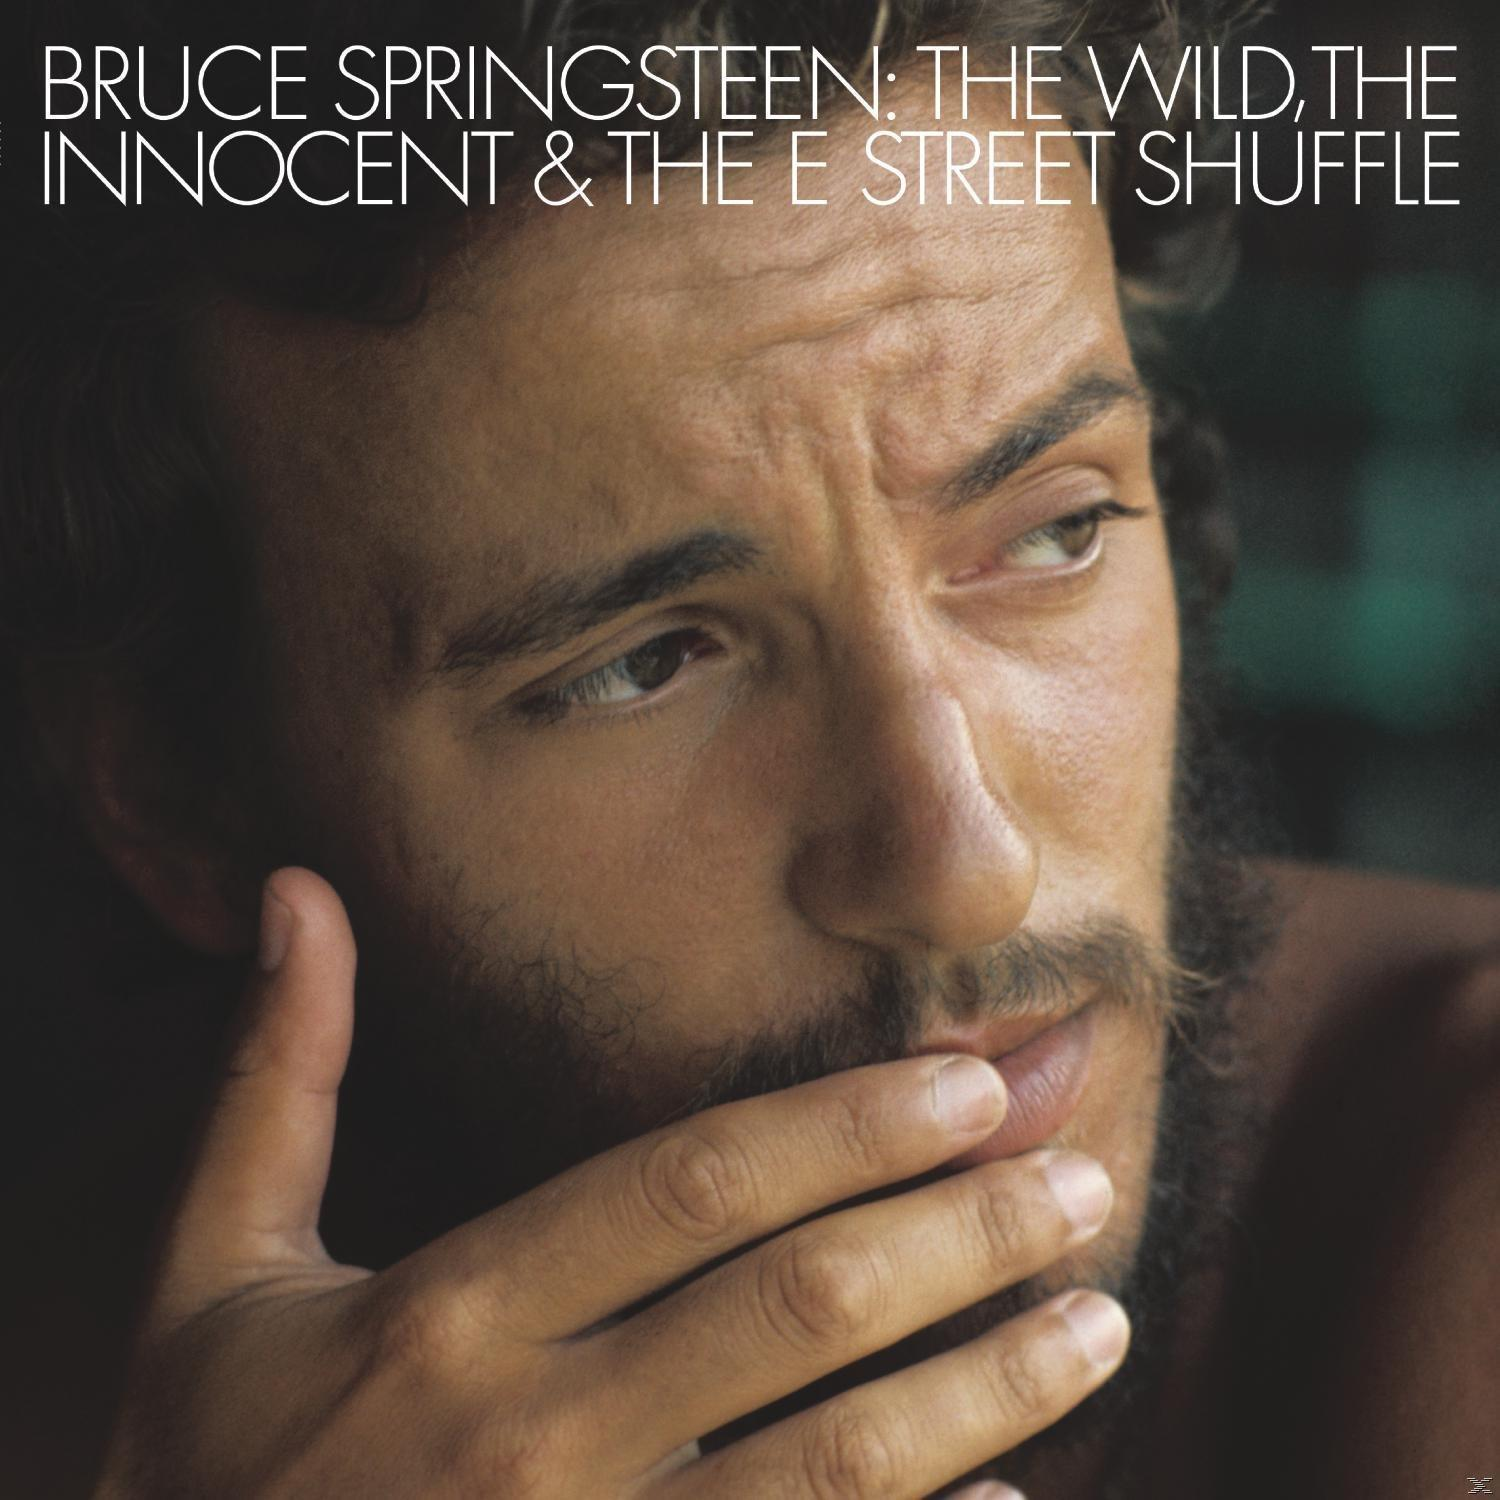 And Street The Wild, - The Bruce Springsteen (Vinyl) - Innocent E Shuffle The